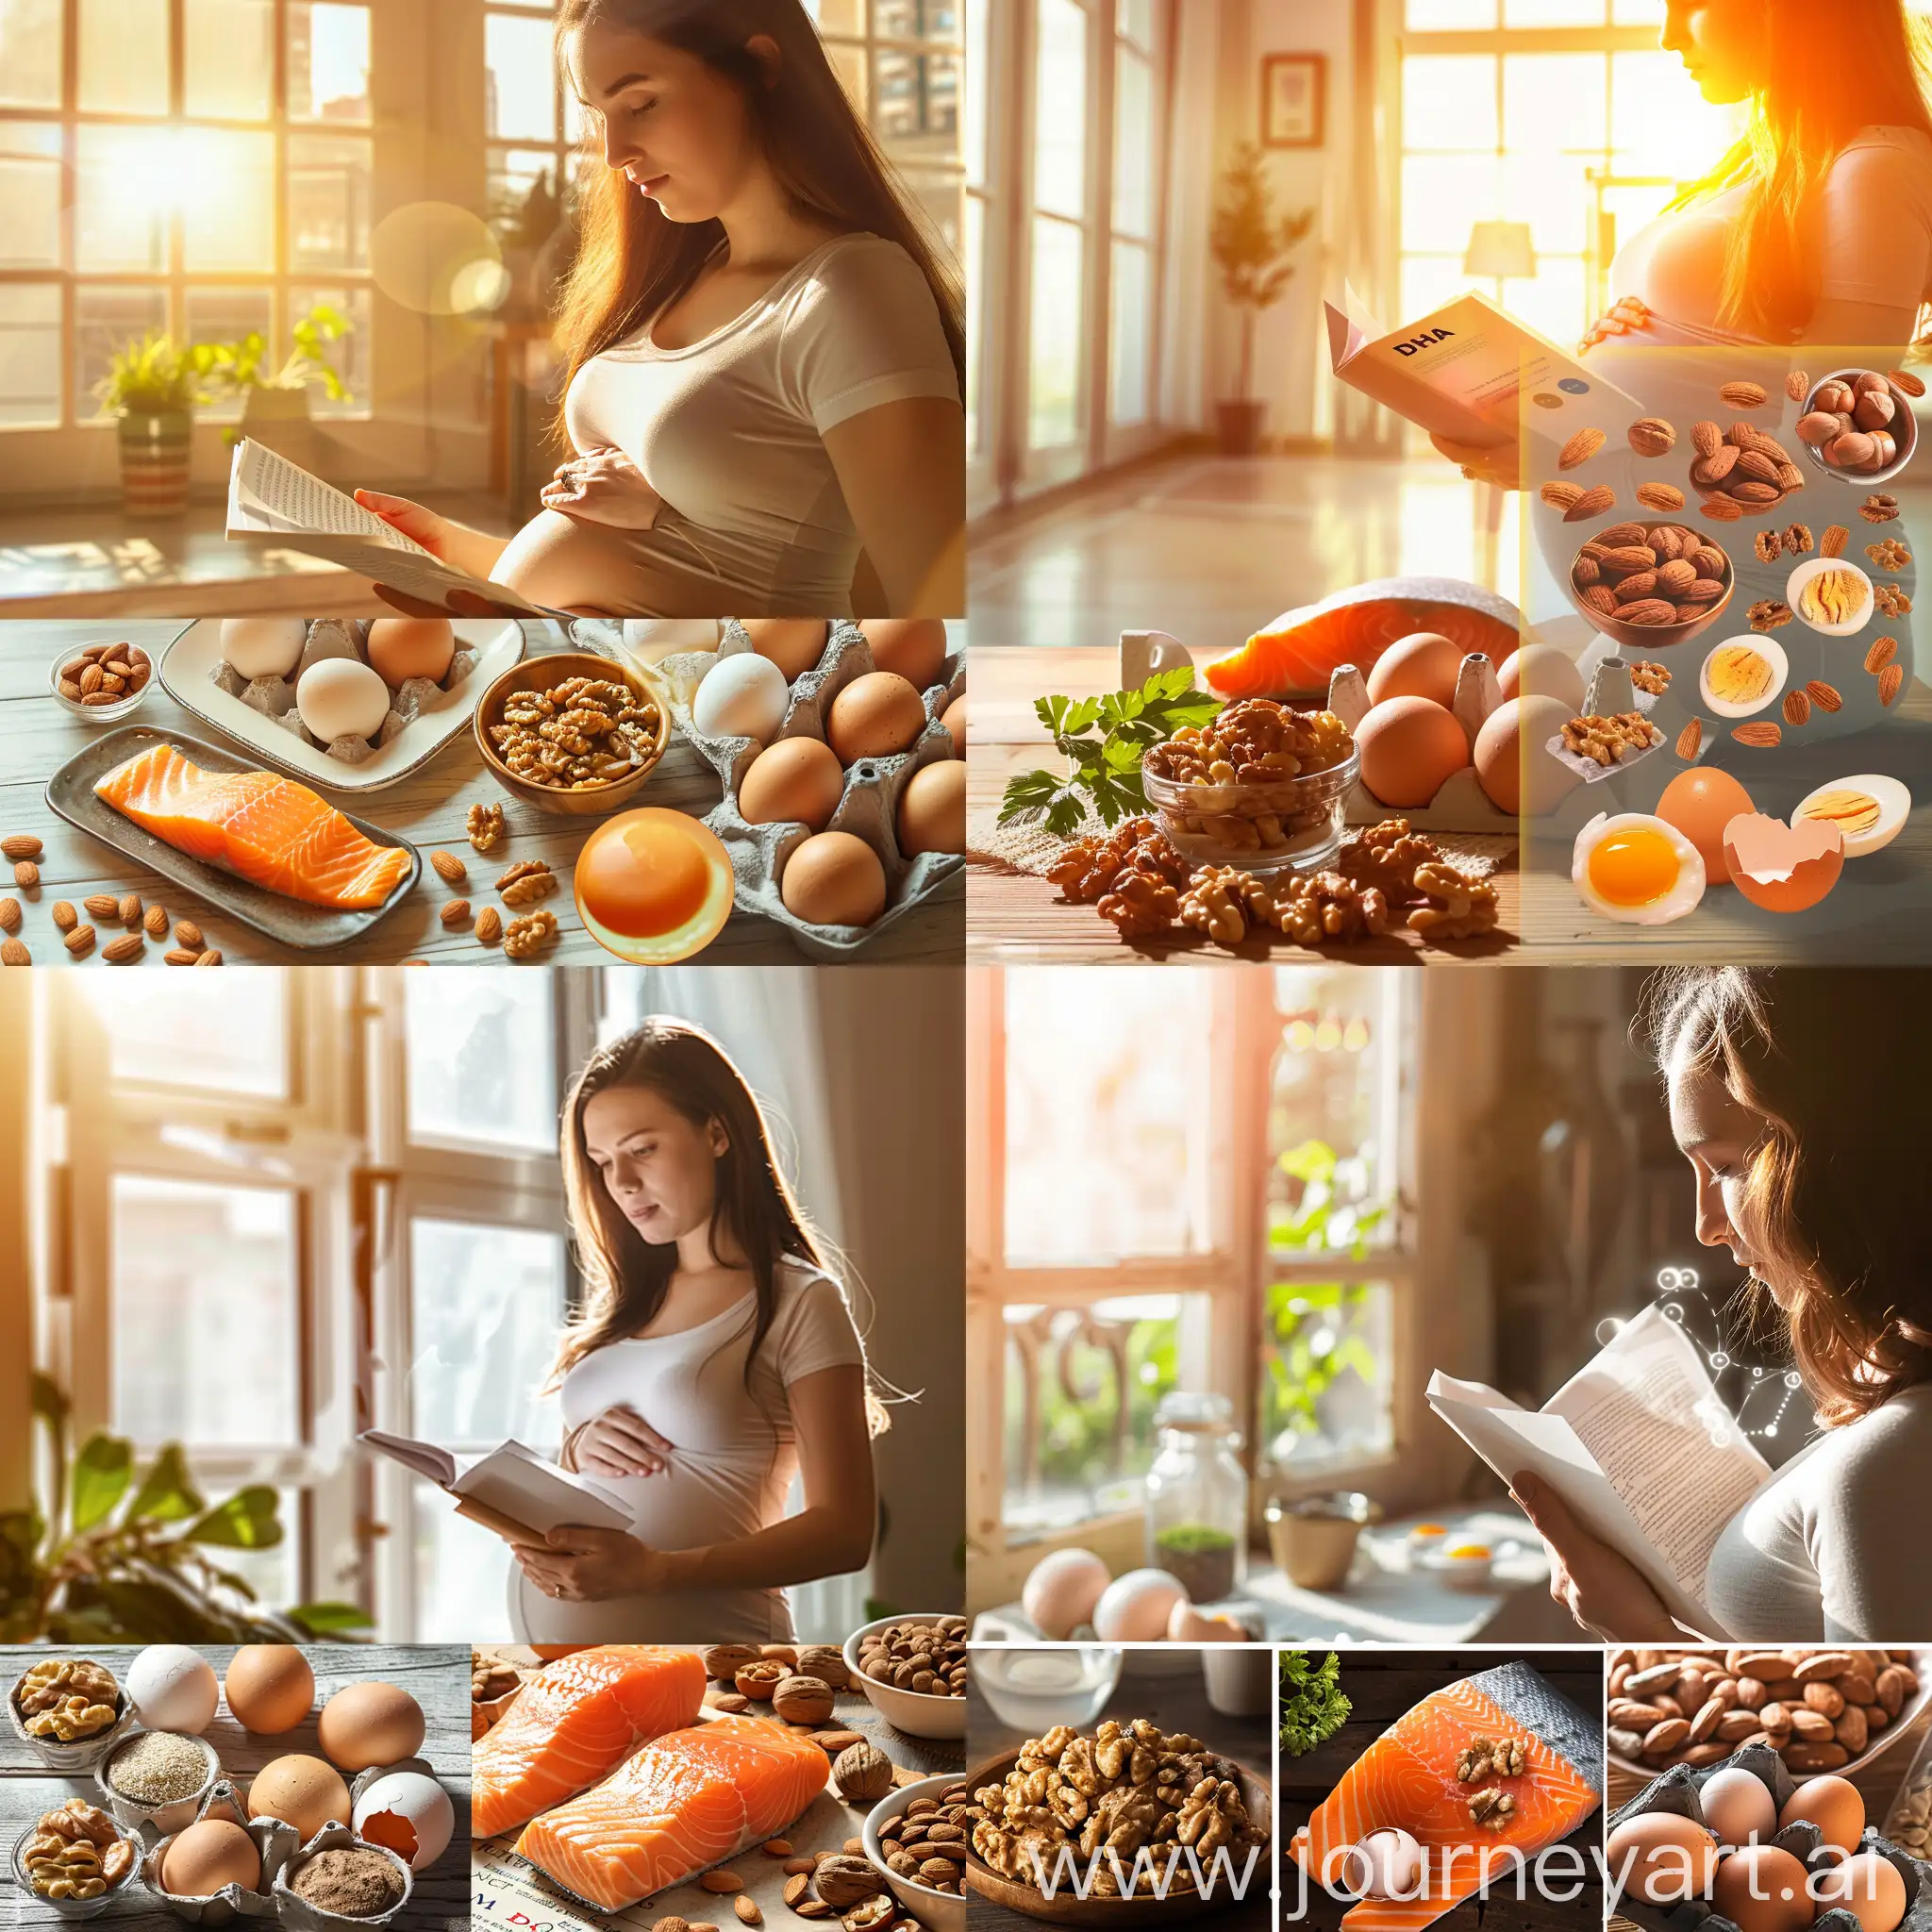 A serene image of a pregnant woman in a sunny room reading about DHA benefits, with an overlay of omega-3 rich foods like salmon, walnuts, and eggs.